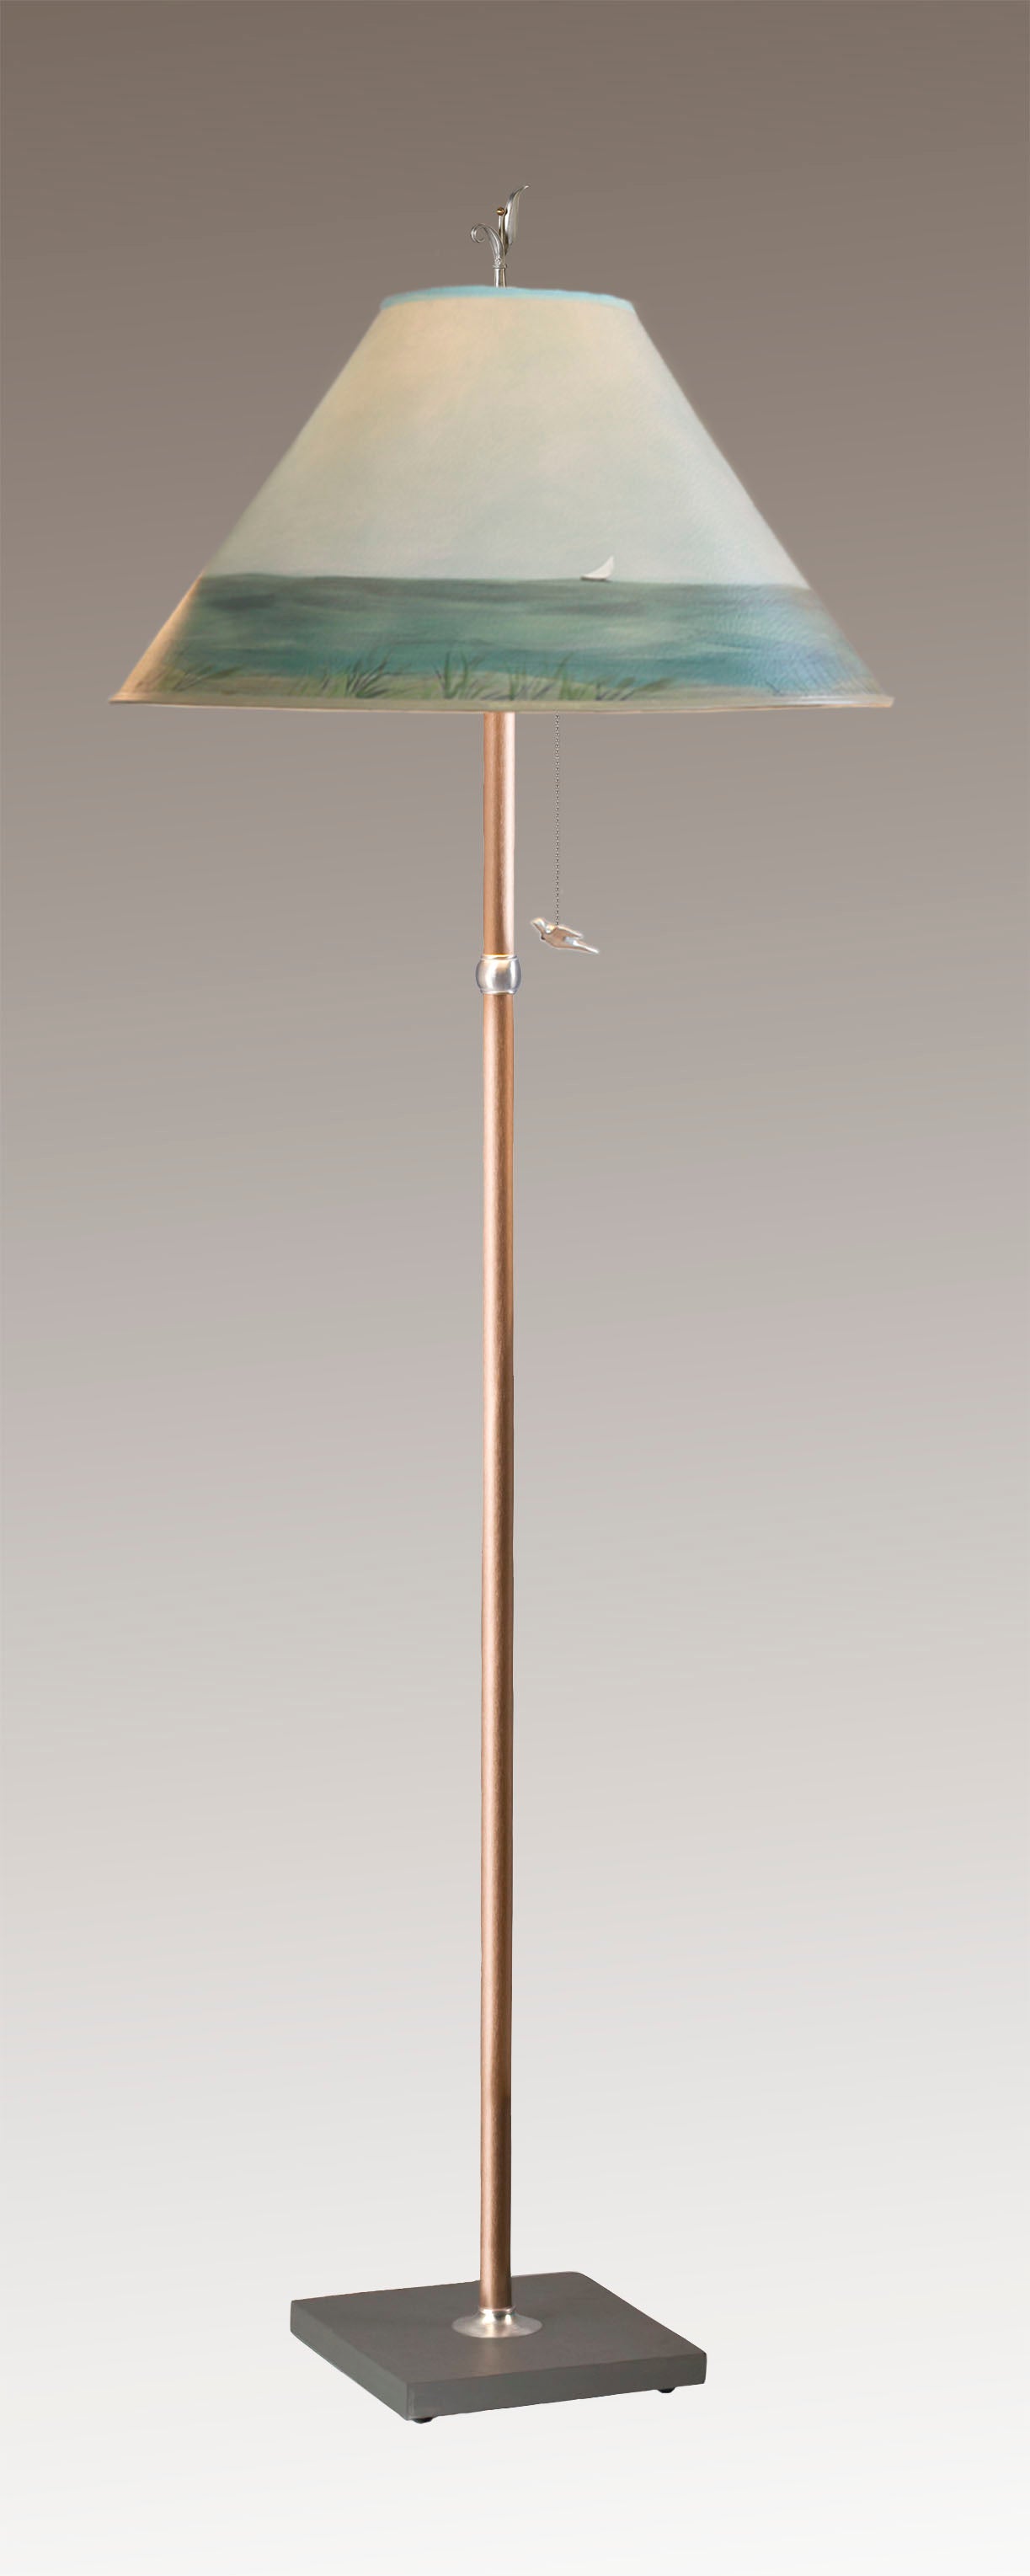 Janna Ugone & Co Floor Lamps Copper Floor Lamp with Large Conical Shade in Shore